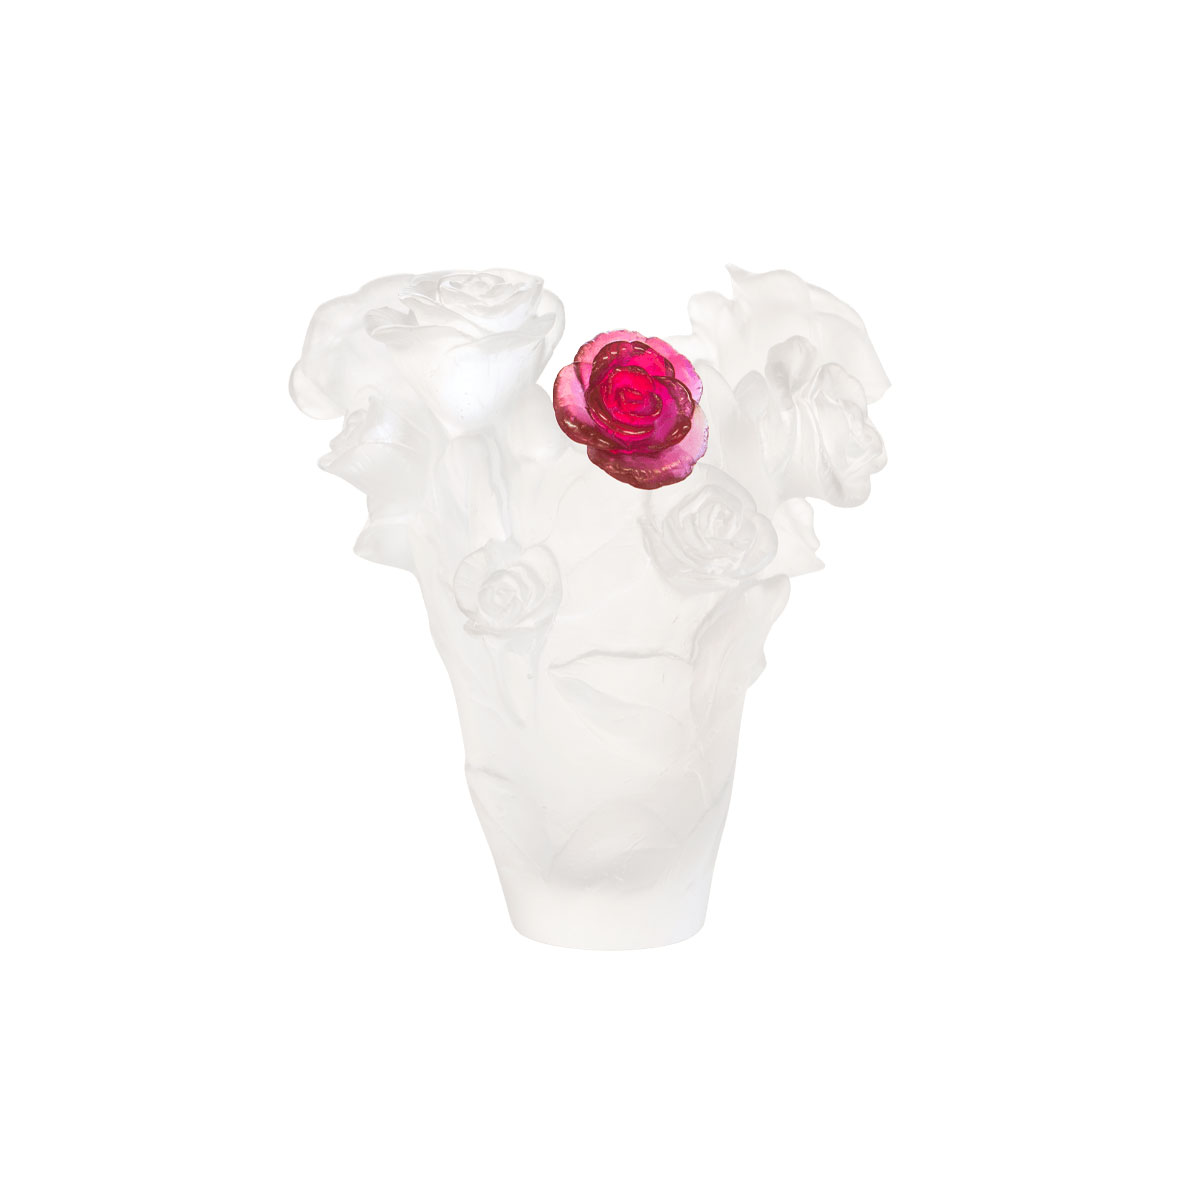 Daum 6.7" Rose Passion Vase in White with Red Flower